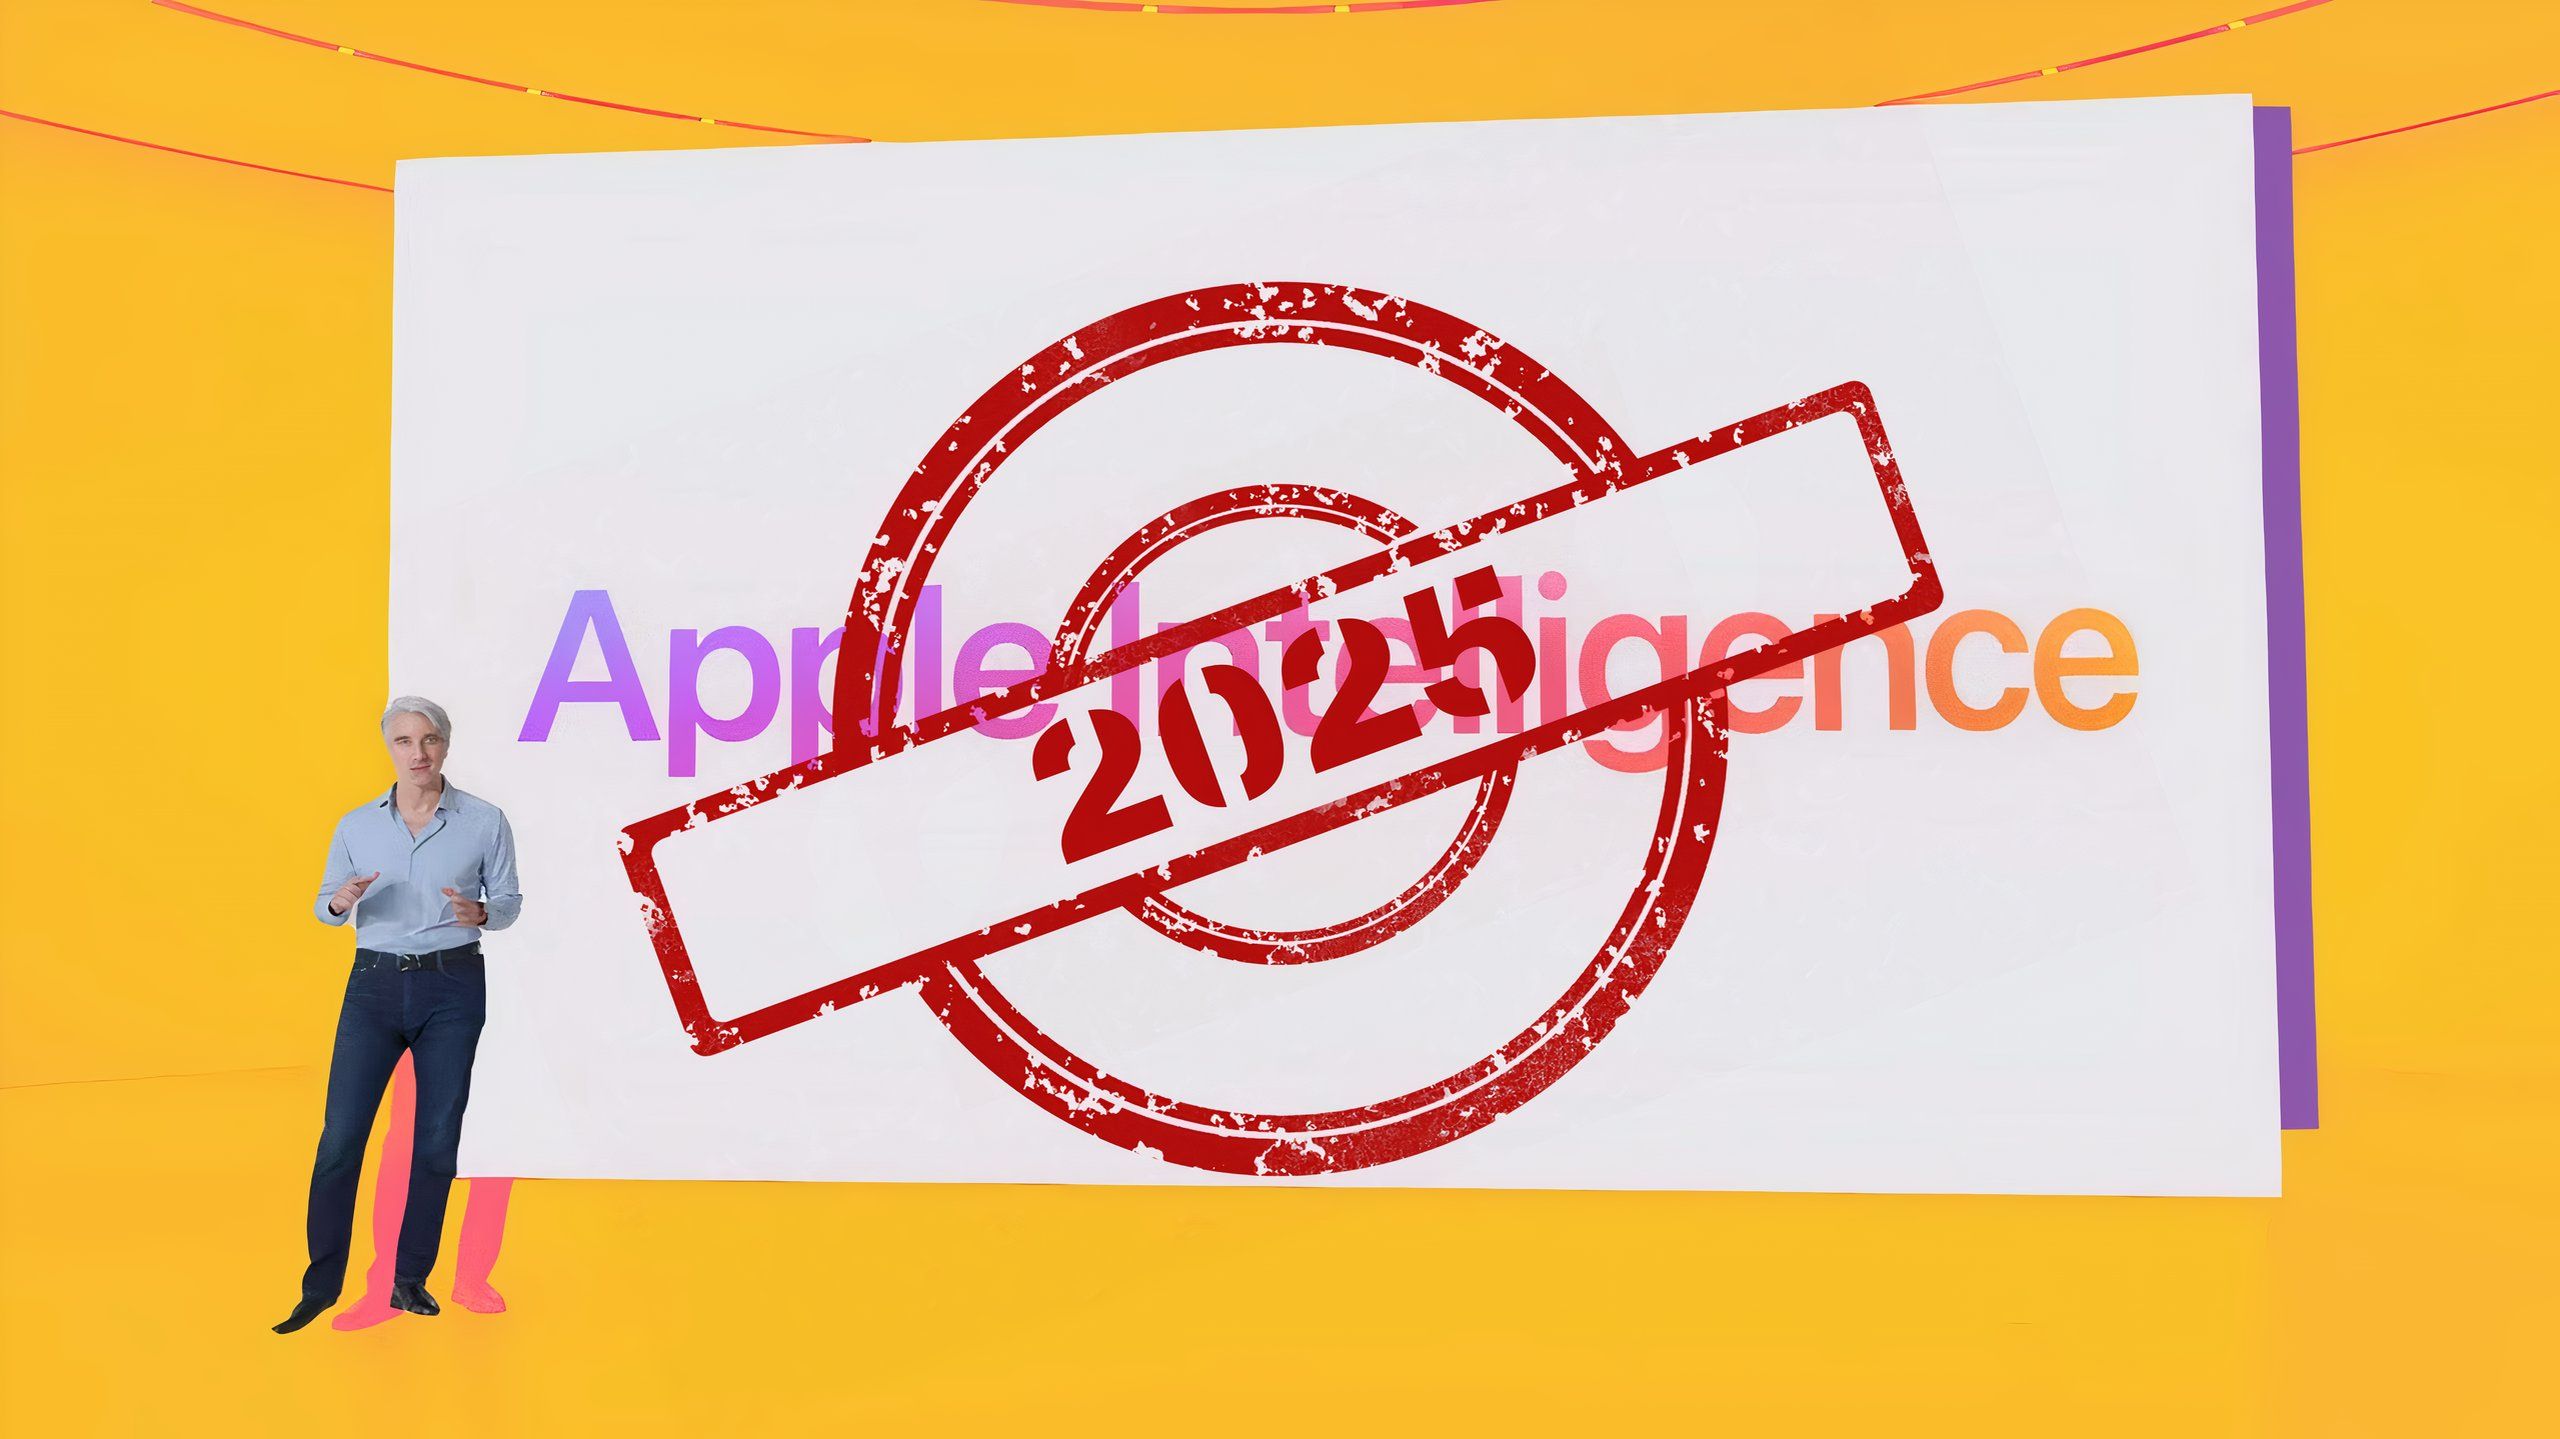 The year 2025 is stamped in red over an image from an Apple Intelligence presentation.